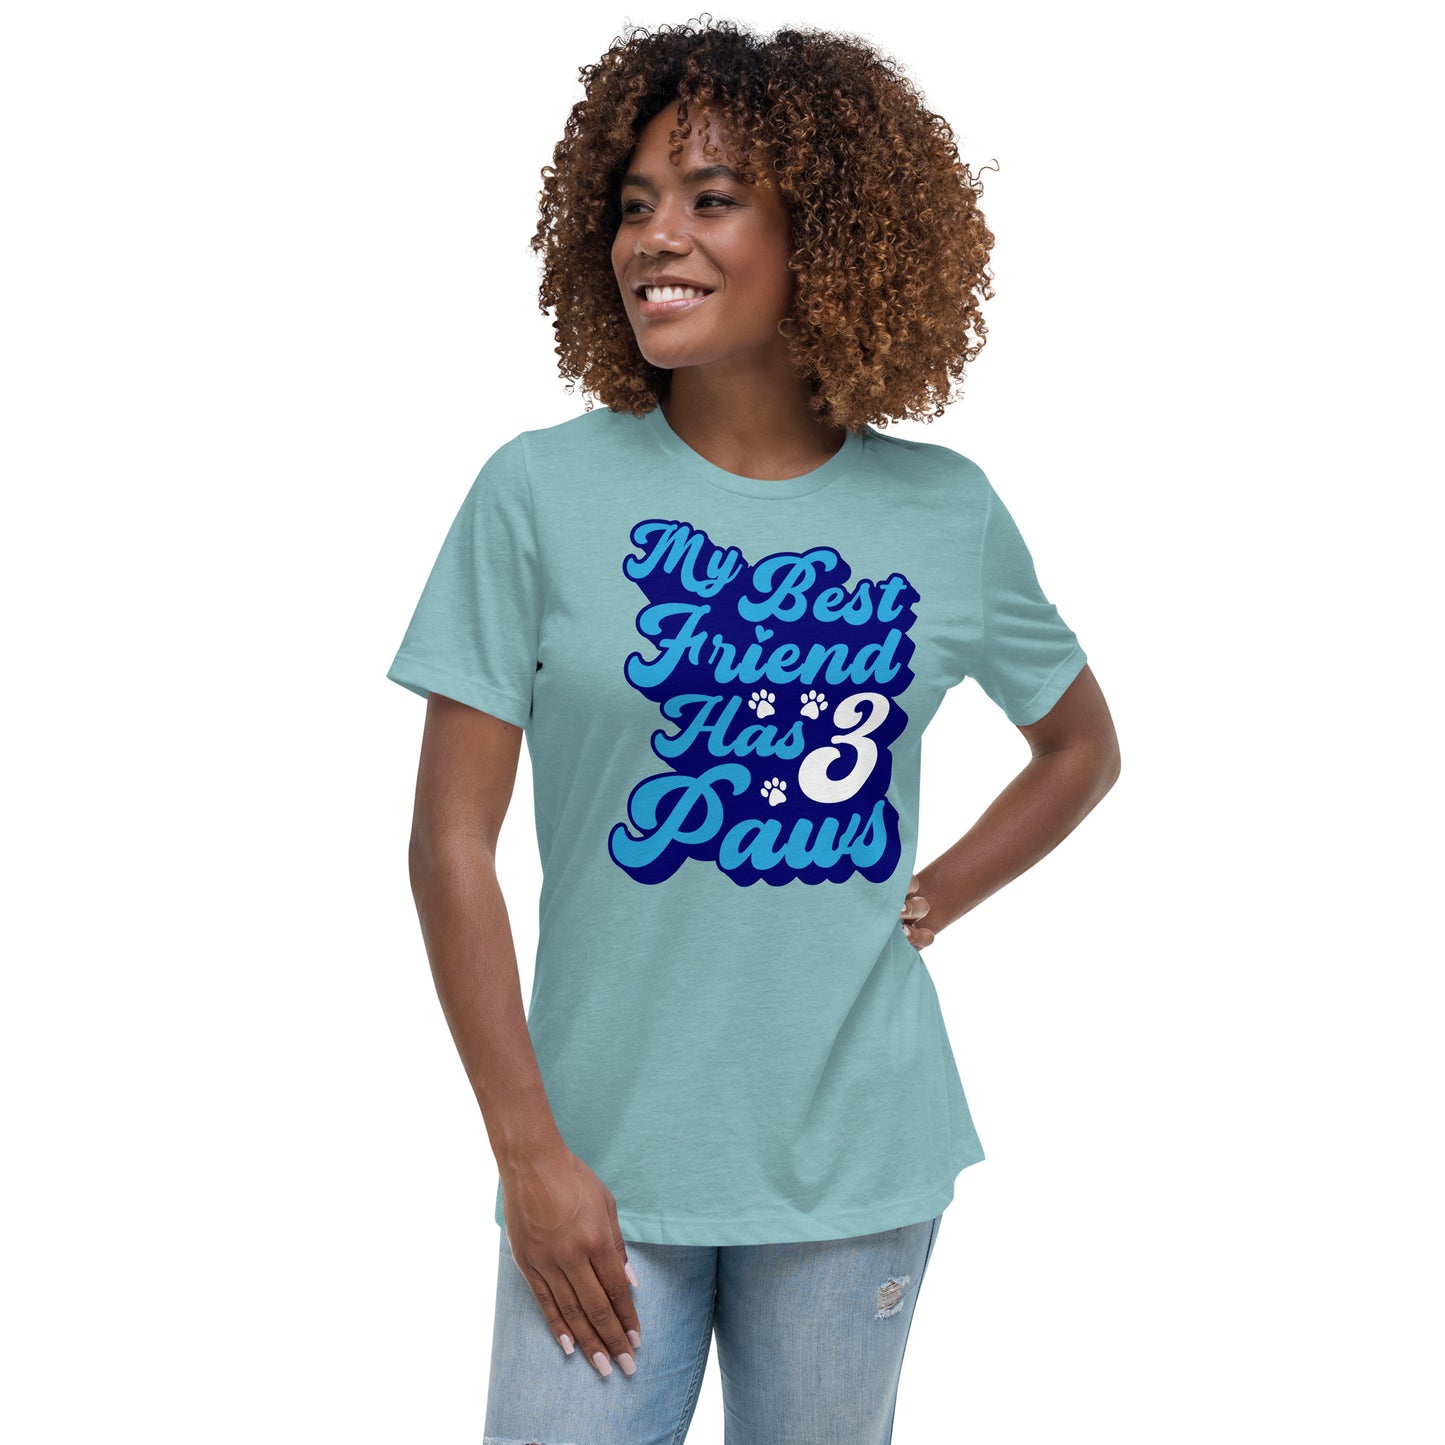 My best friend has 3 Paws women’s relaxed fit t-shirts by Dog Artistry heather blue lagoon color